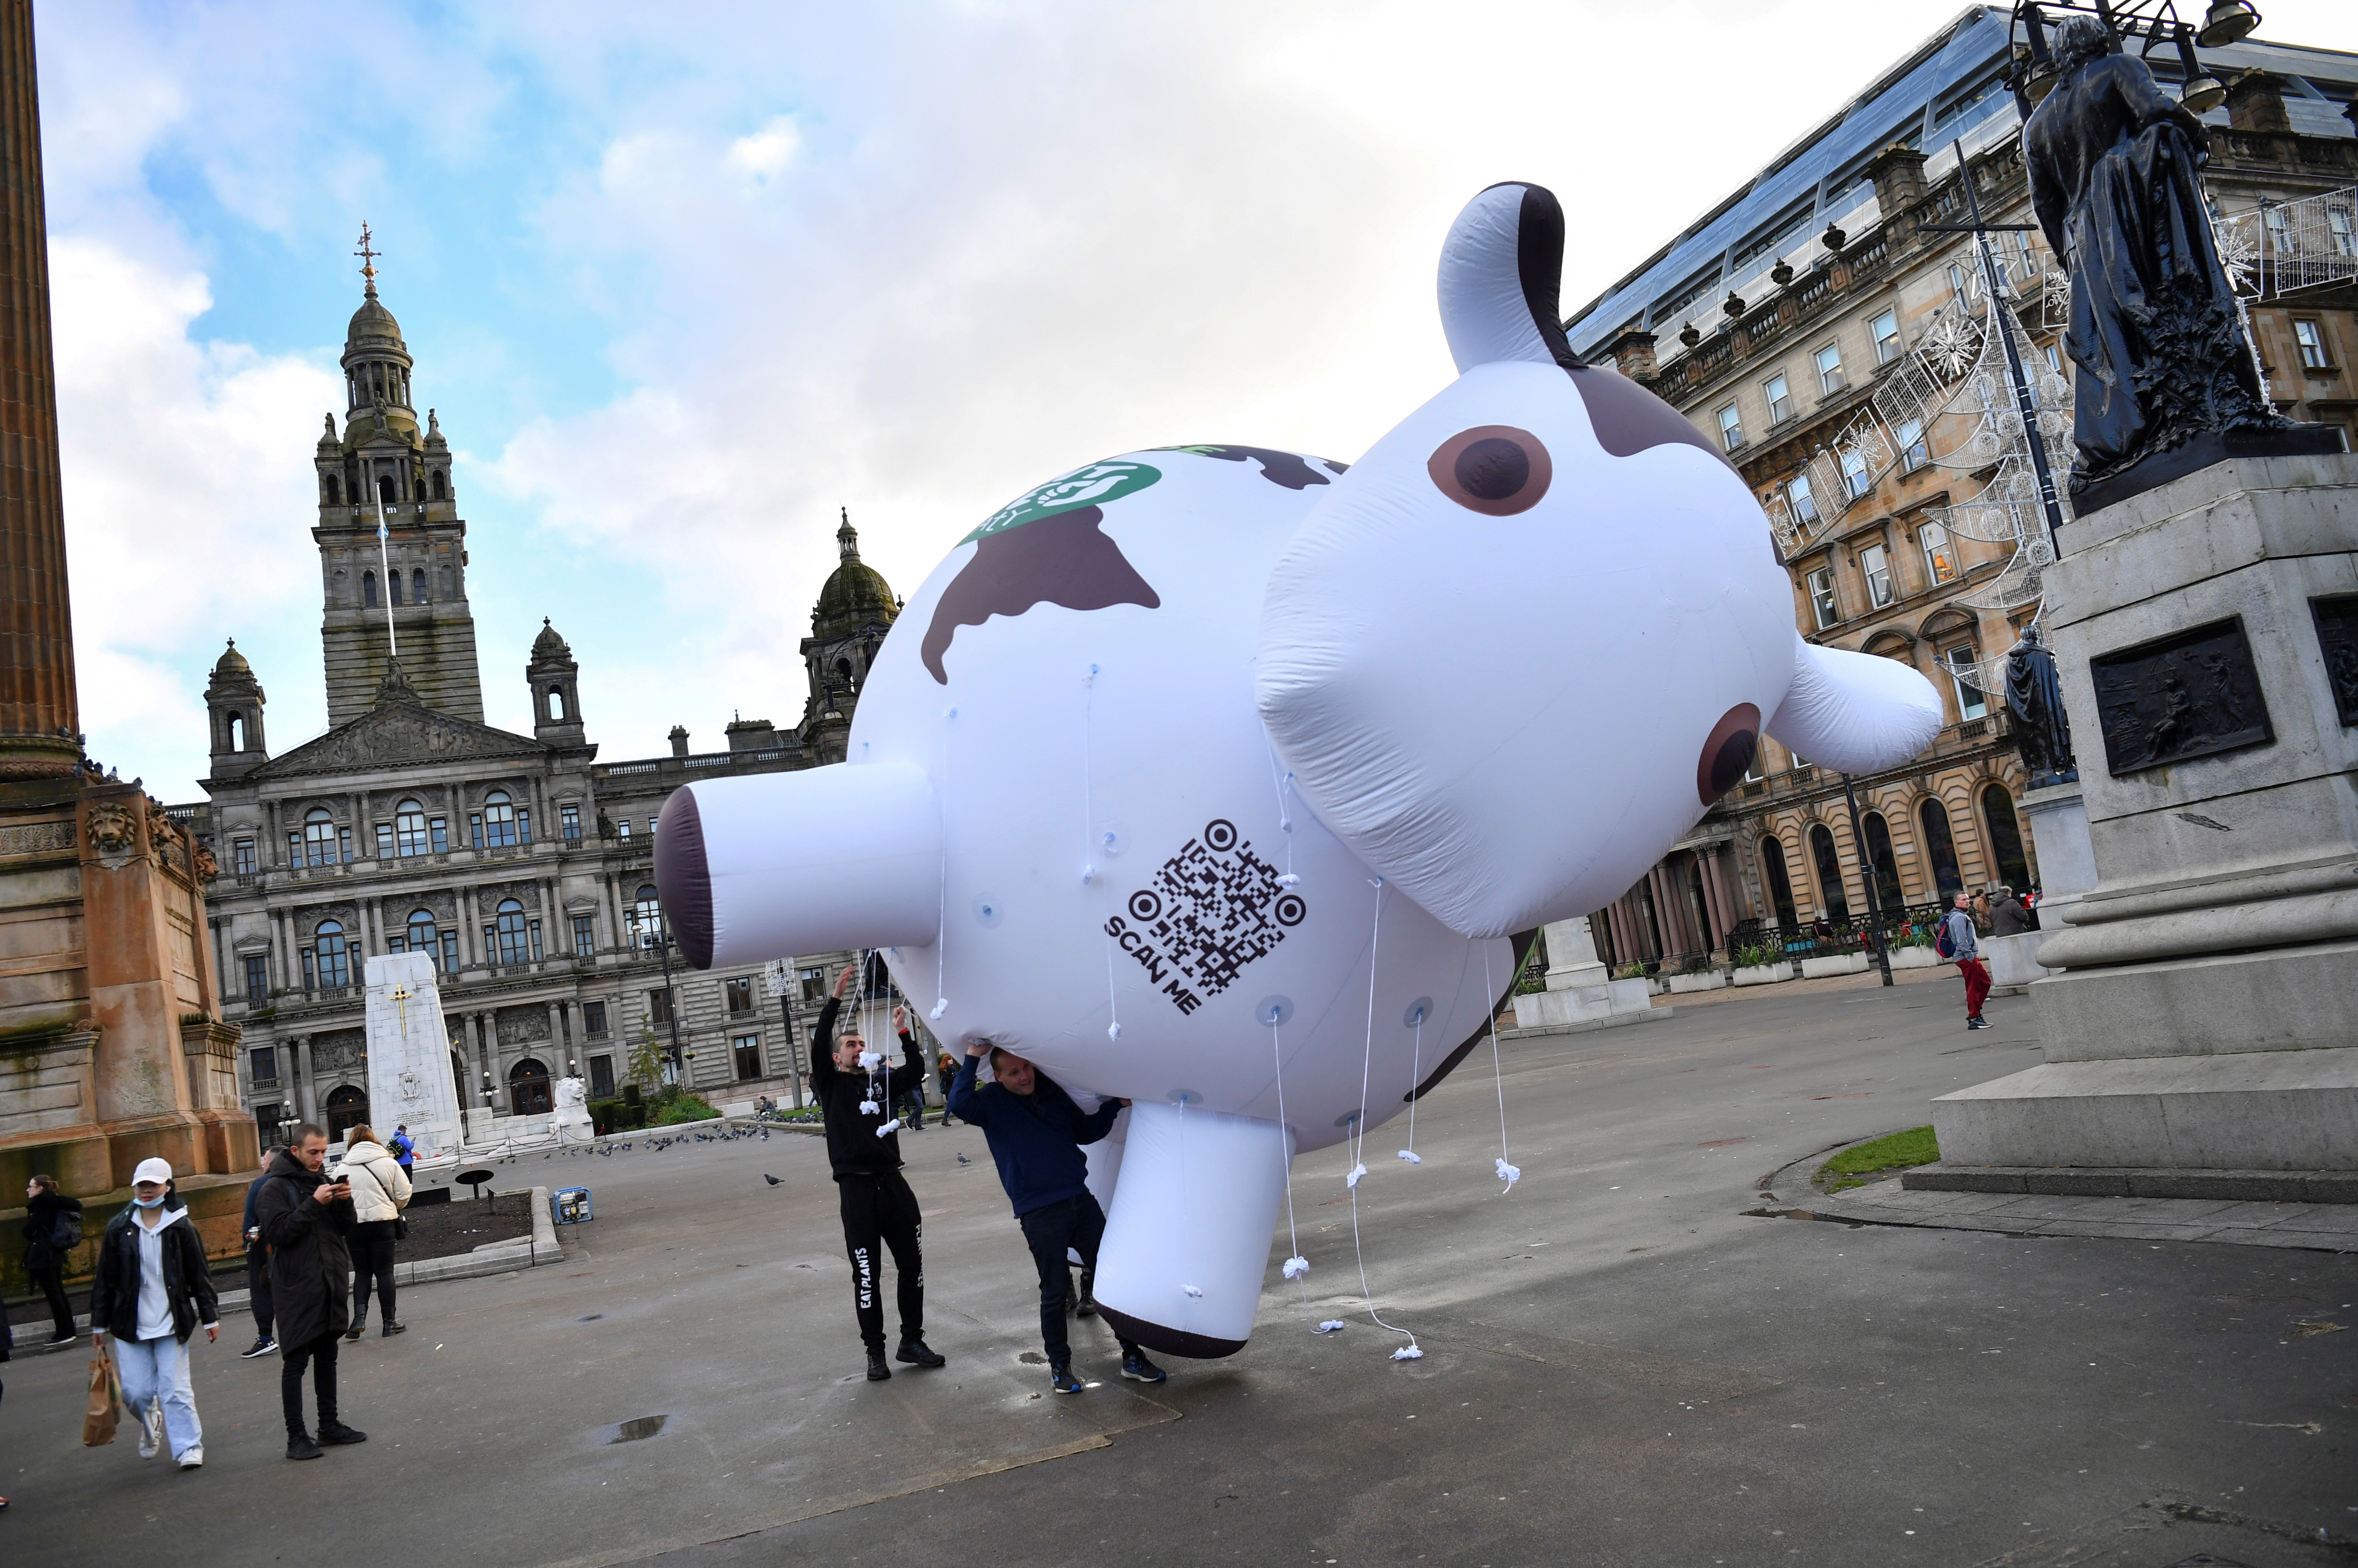 Activists attempt to carry an inflatable cow as they protest in favour of a plant based diet during a demonstration at George Square as the UN Climate Change Conference (COP26) takes place, in Glasgow, Scotland, Britain, November 9, 2021. REUTERS/Dylan Martinez/File Photo